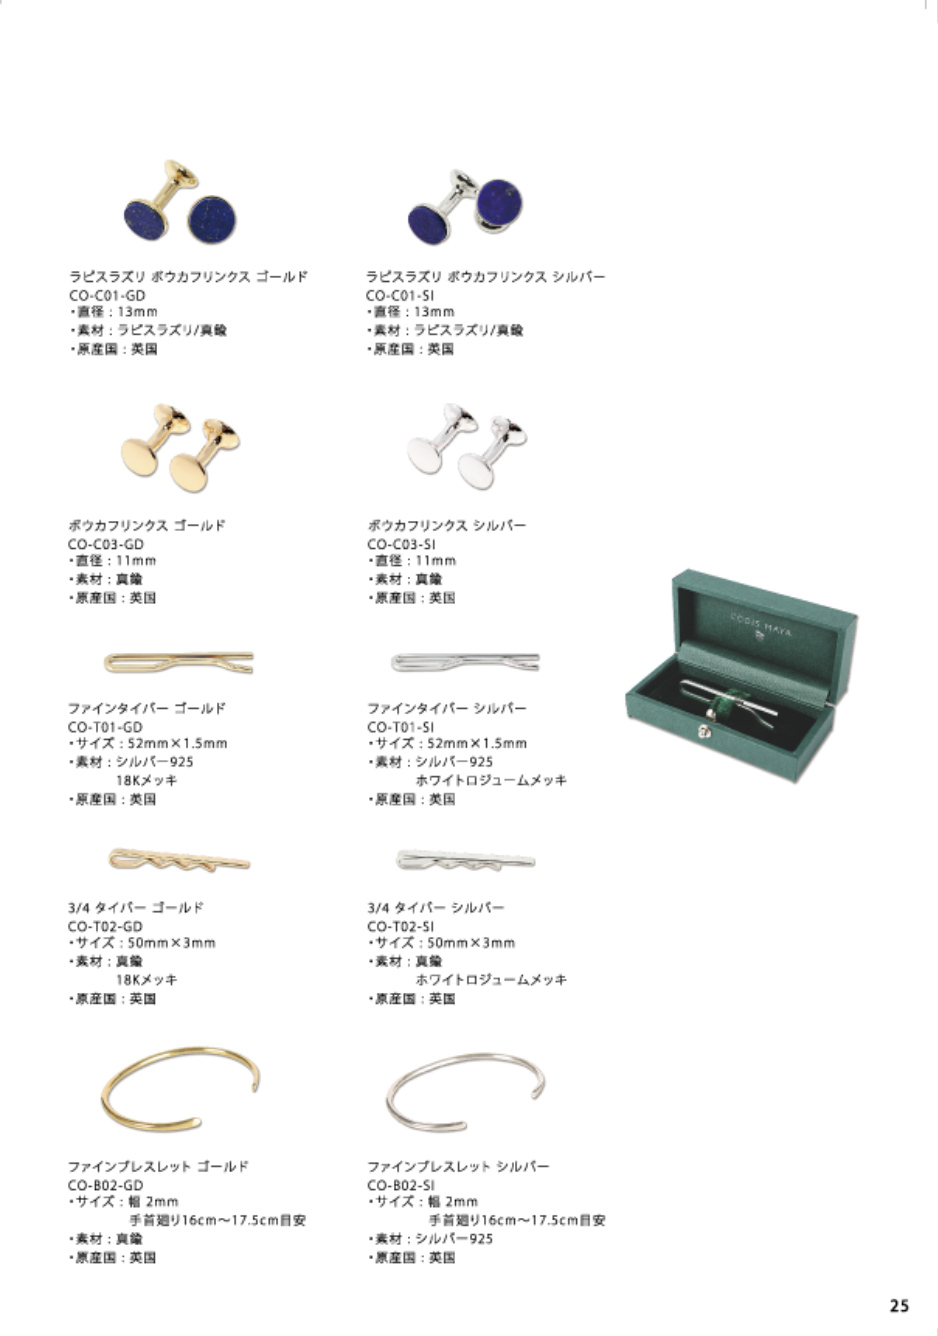 EXCY FORMAL ACCESSORY COLLECTION Vol.8 pg.25